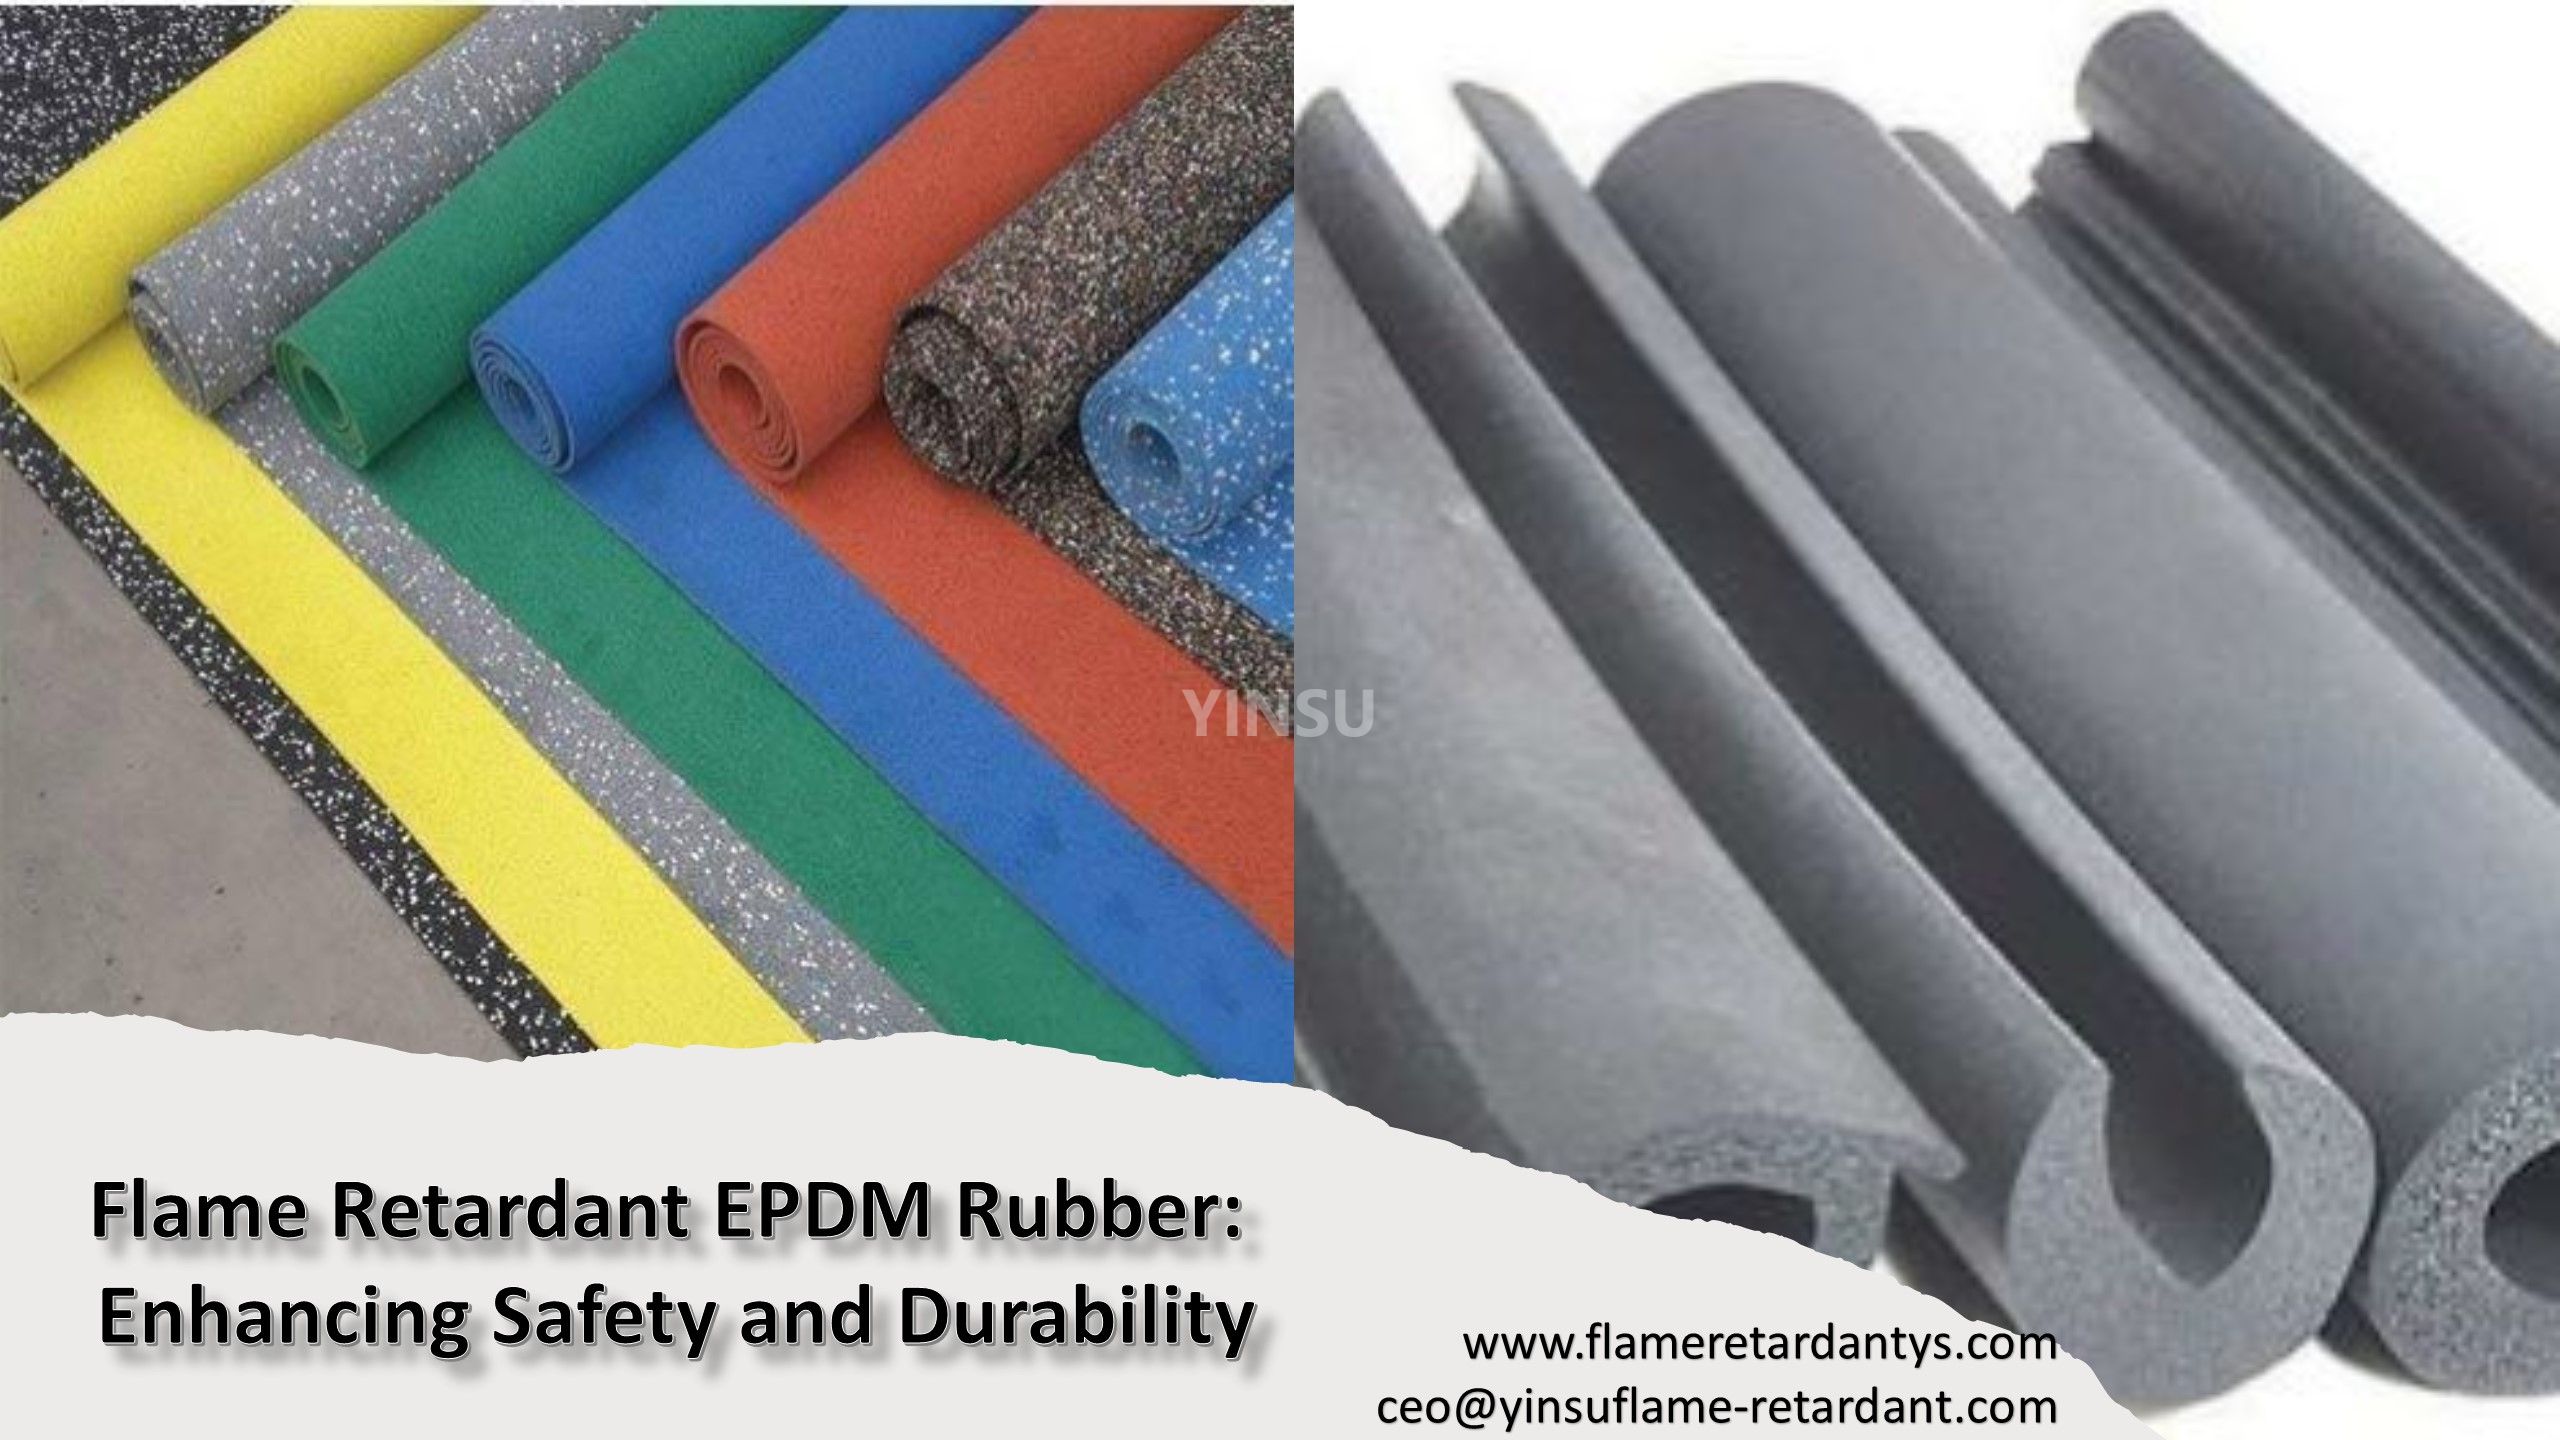 Flame Retardant EPDM Rubber: Enhancing Safety and Durability